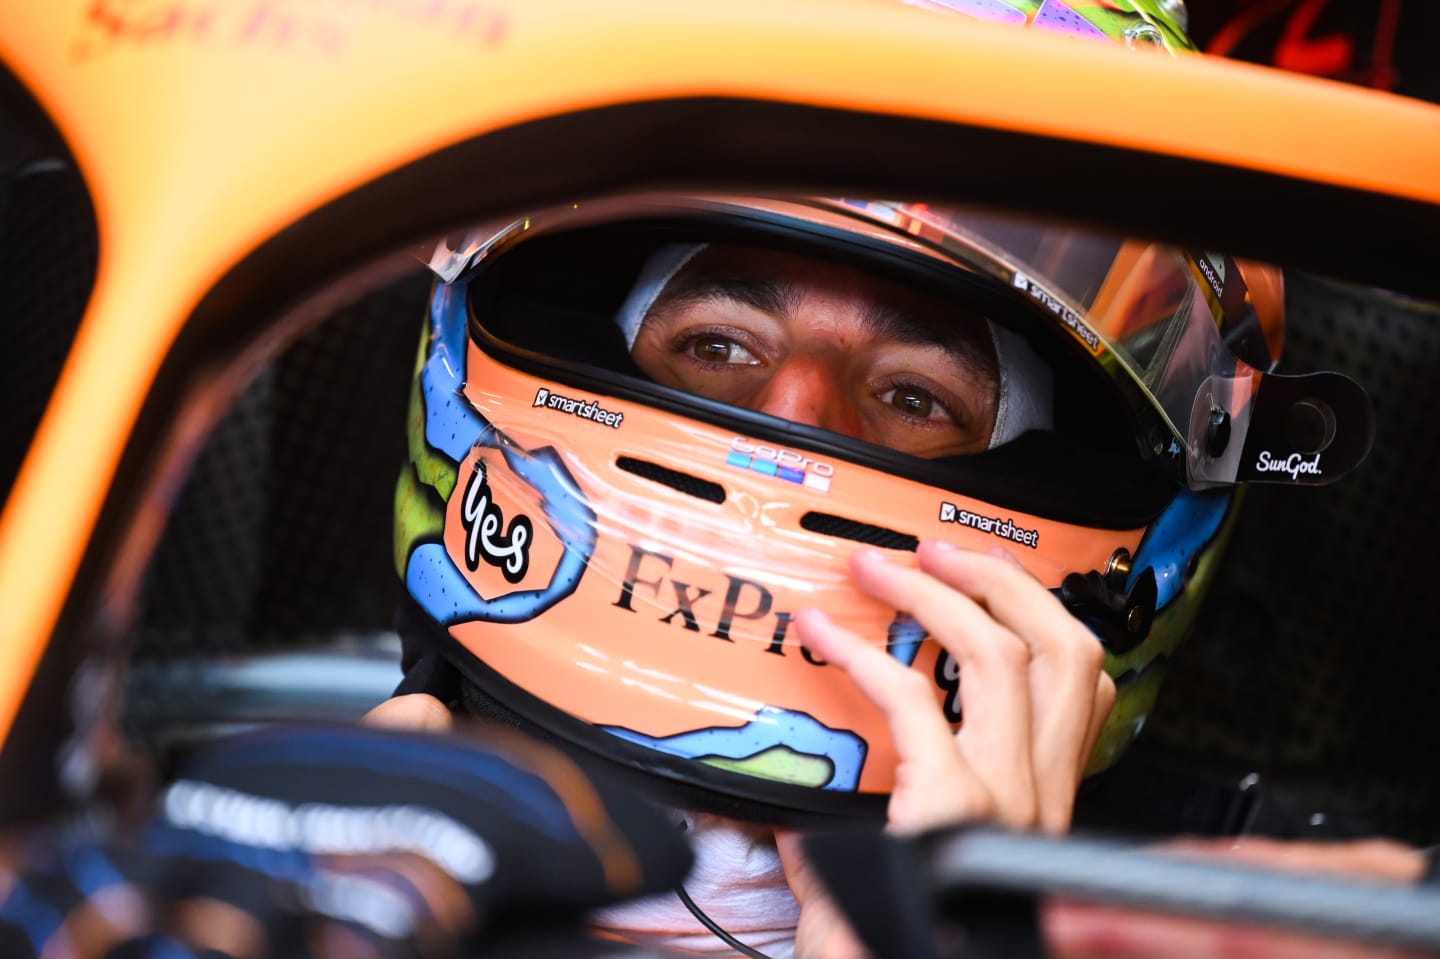 MONZA, ITALY - SEPTEMBER 09: Daniel Ricciardo of Australia and McLaren prepares to drive in the garage during practice ahead of the F1 Grand Prix of Italy at Autodromo Nazionale Monza on September 09, 2022 in Monza, Italy. (Photo by Clive Mason/Getty Images)